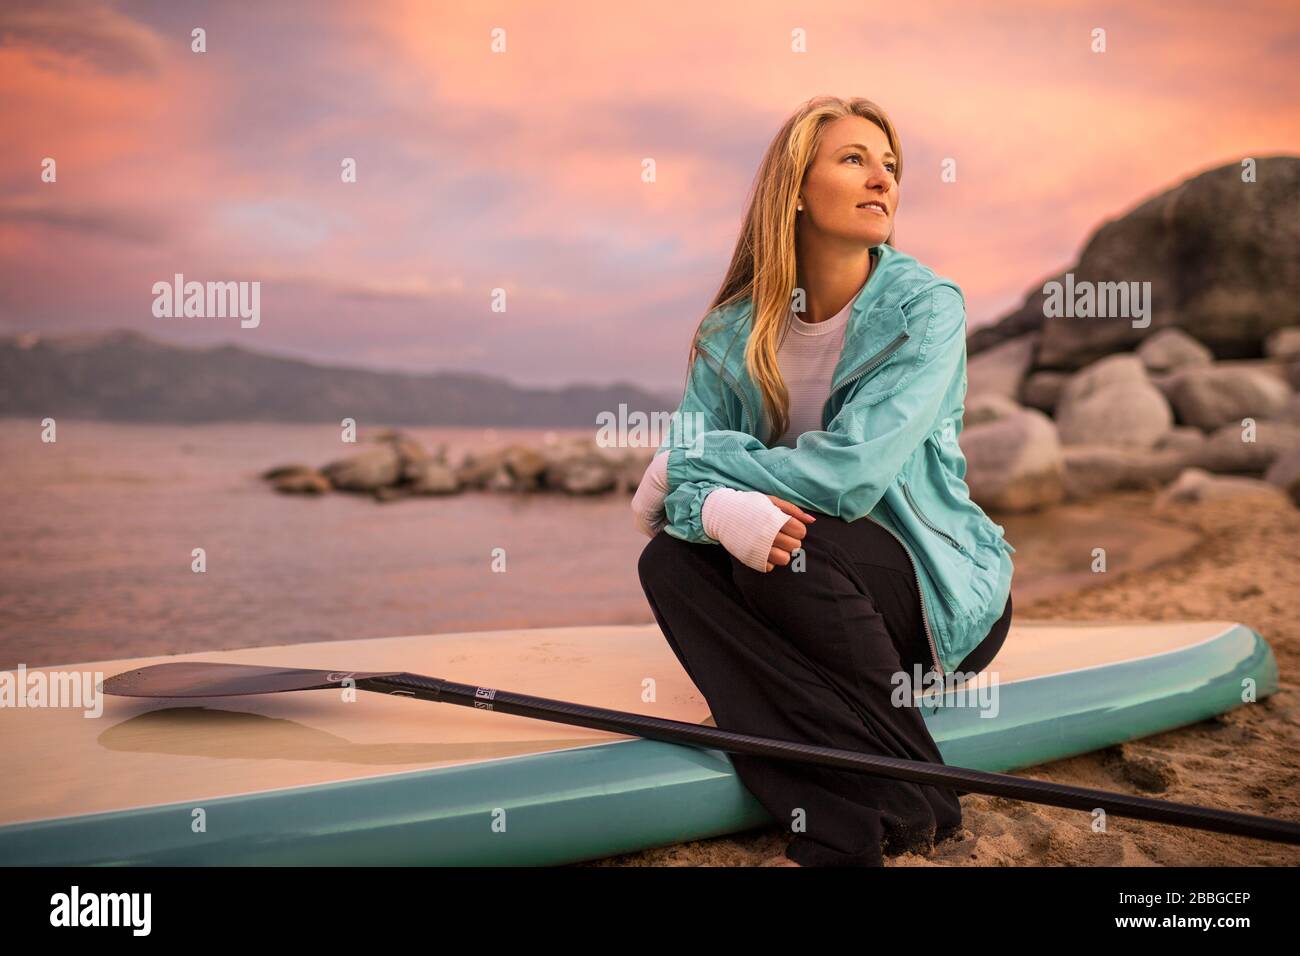 Young woman sitting on her paddle board Stock Photo